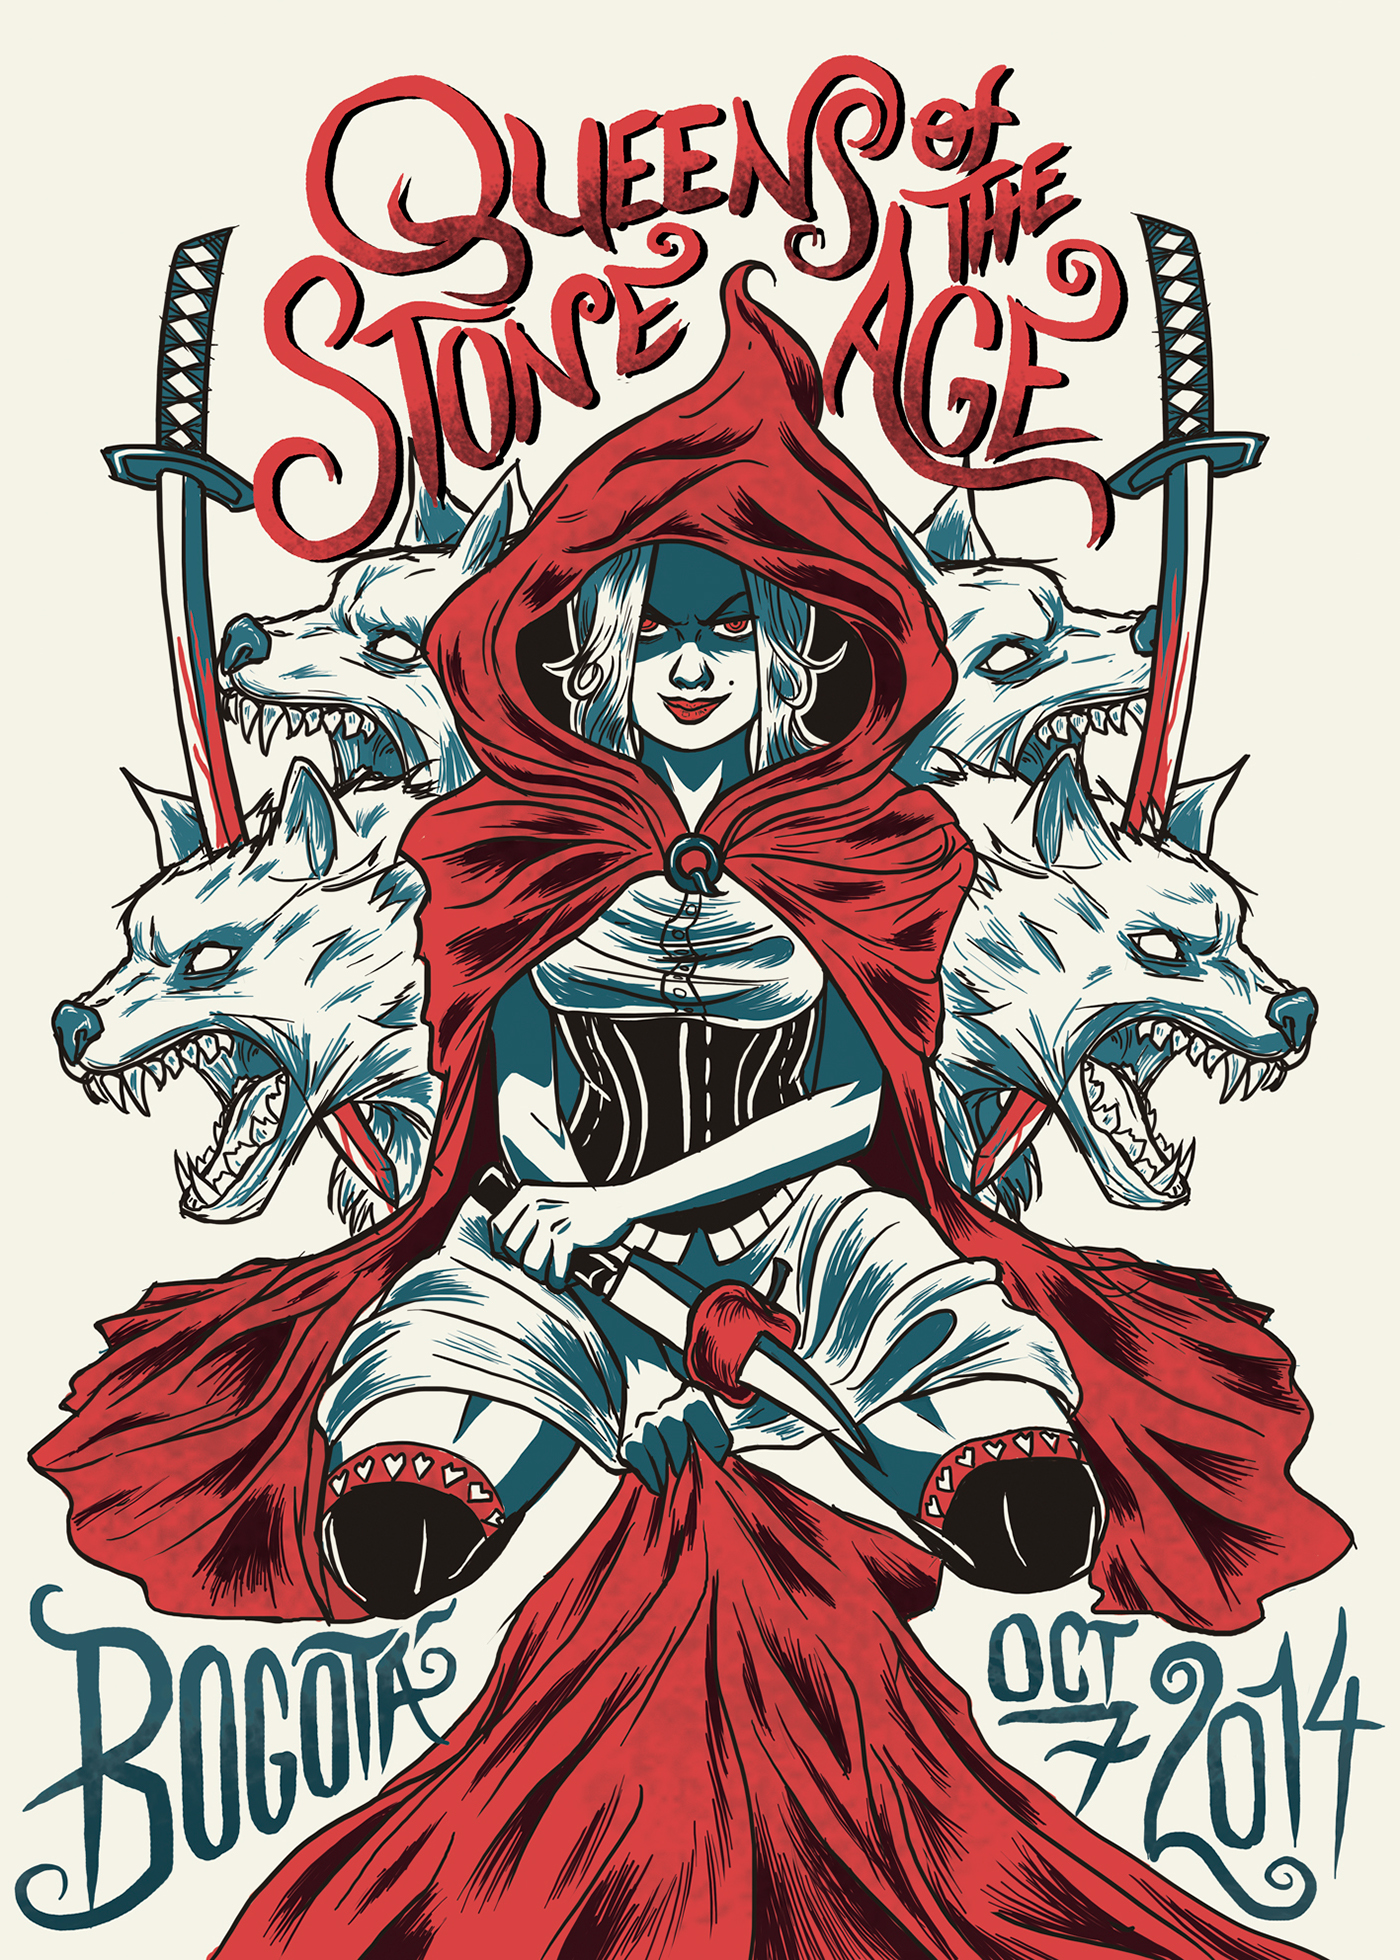 Gig Poster: Queens of the stone age en Colombia on Behance Queens Of The Stone Age Poster 2014